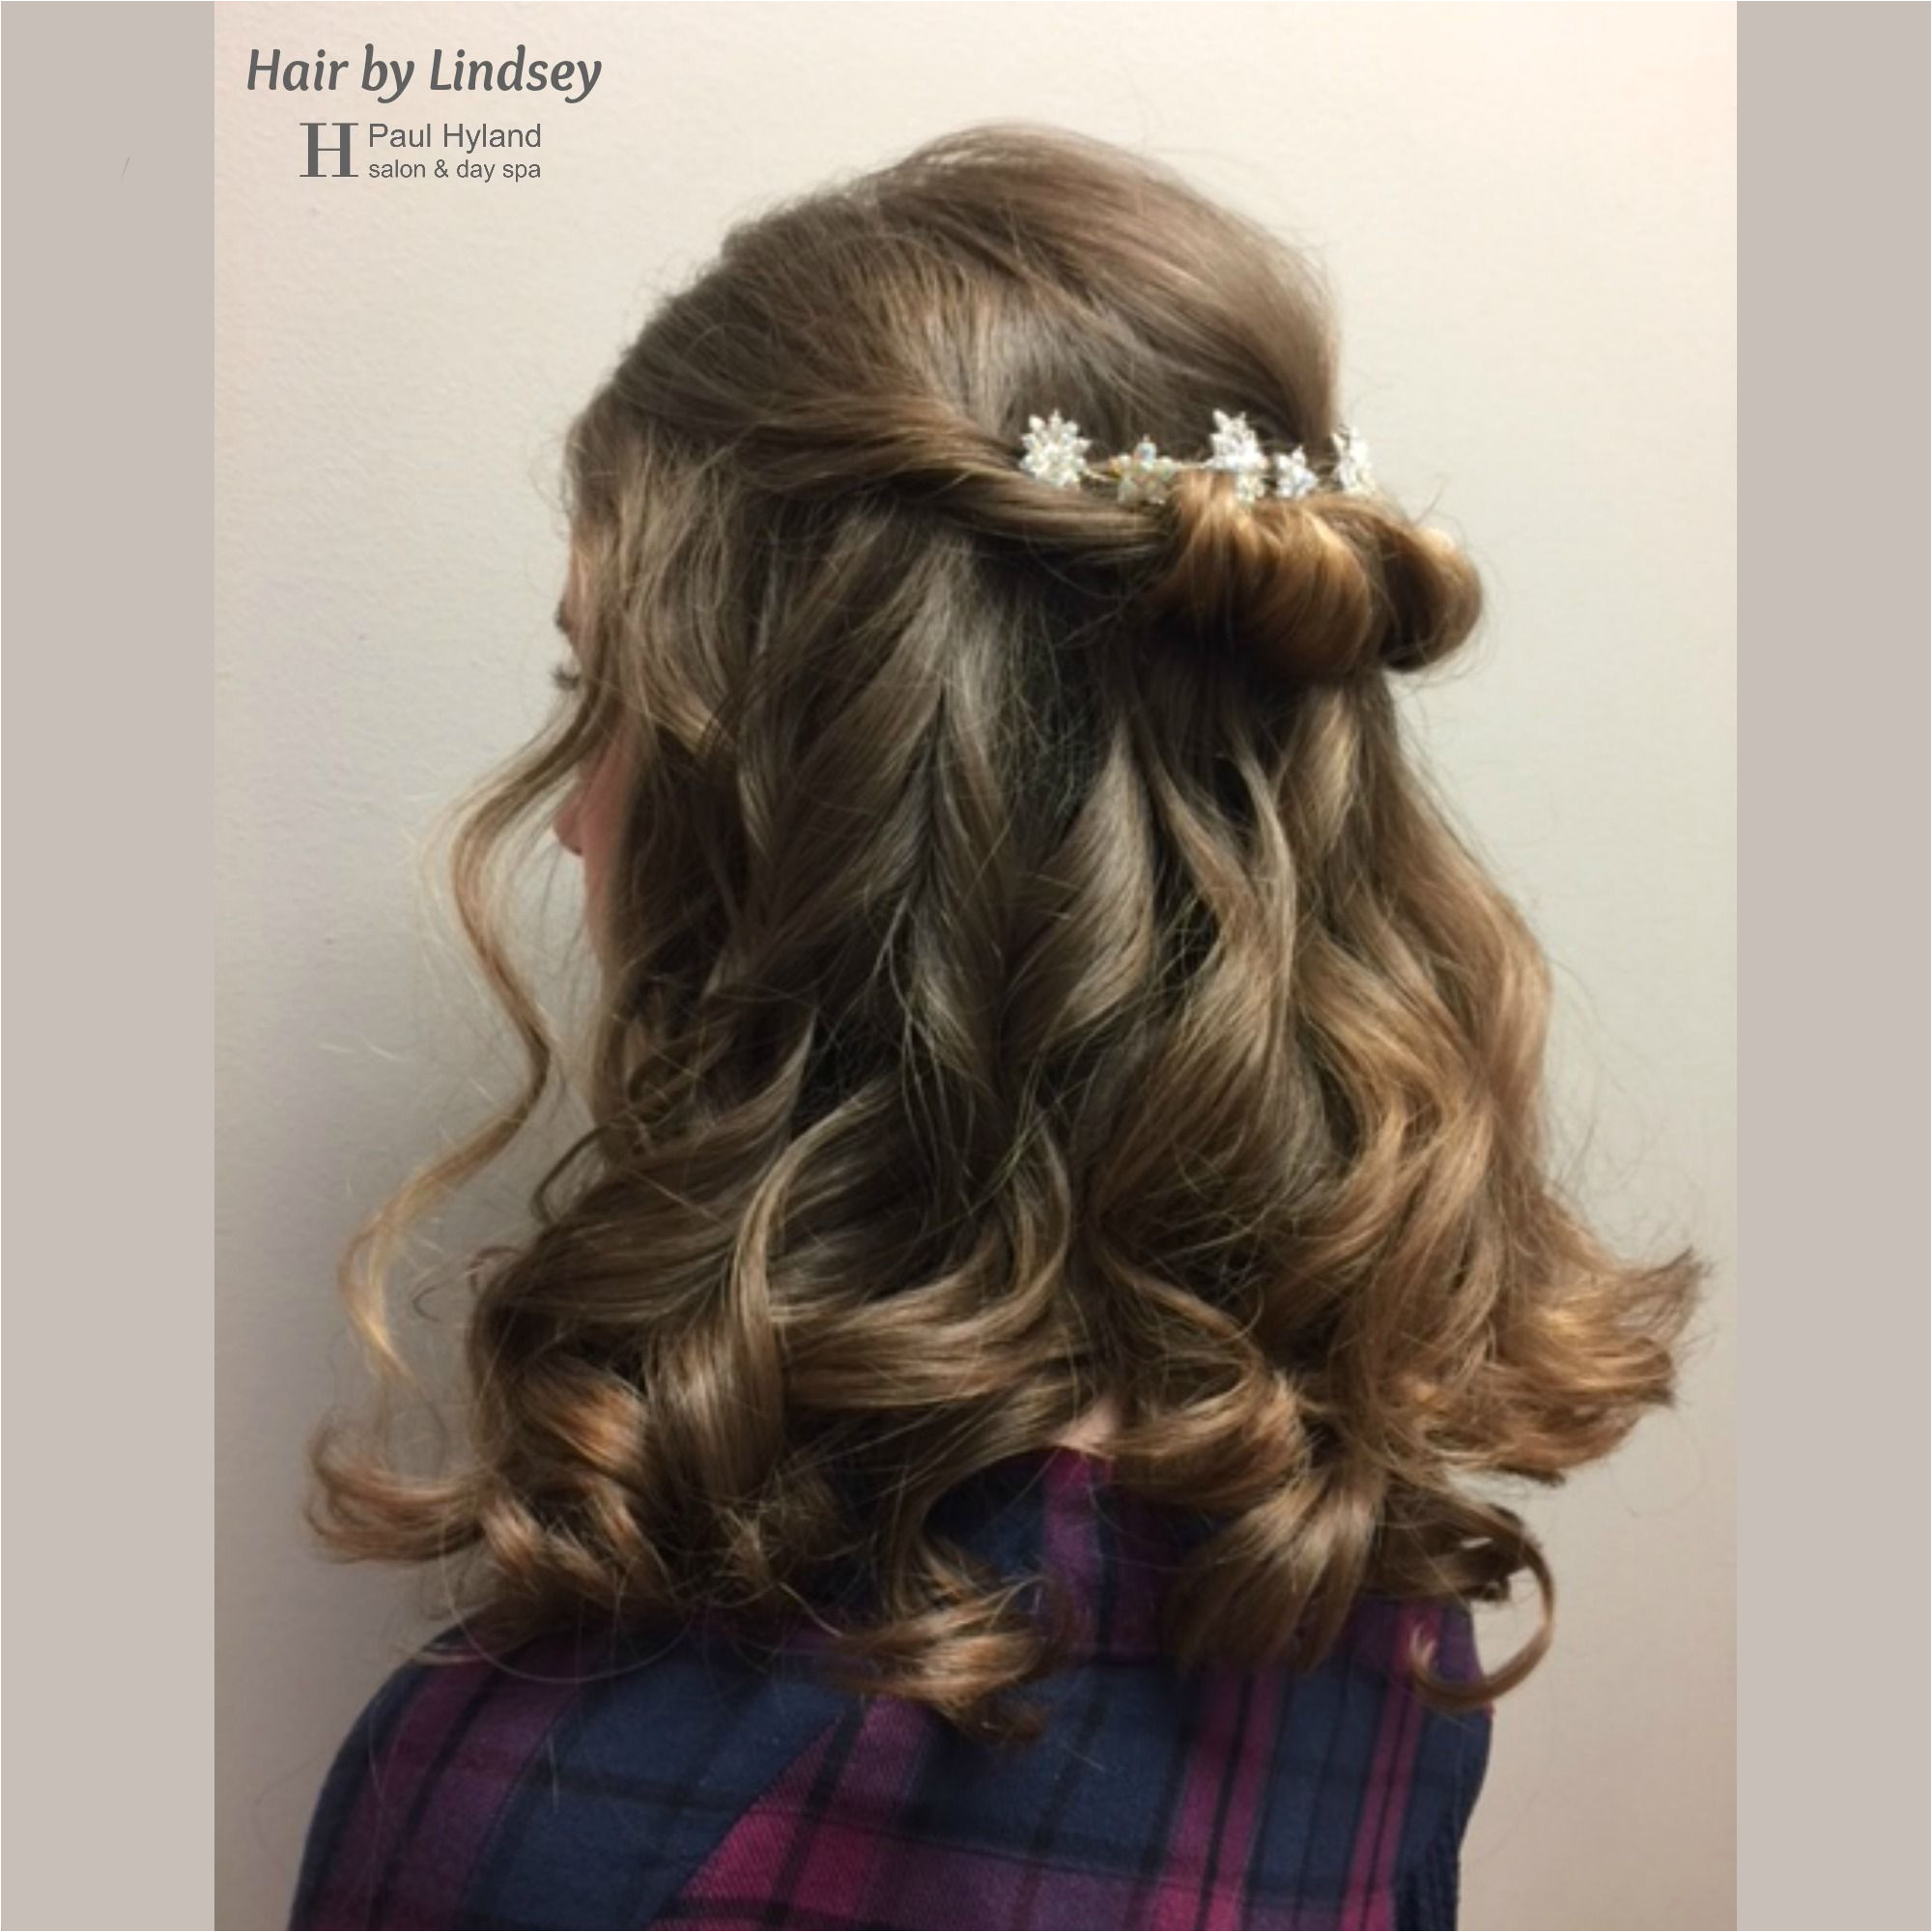 Twists and curls Pretty down style for wedding prom or other special occasions Hair by Lindsey